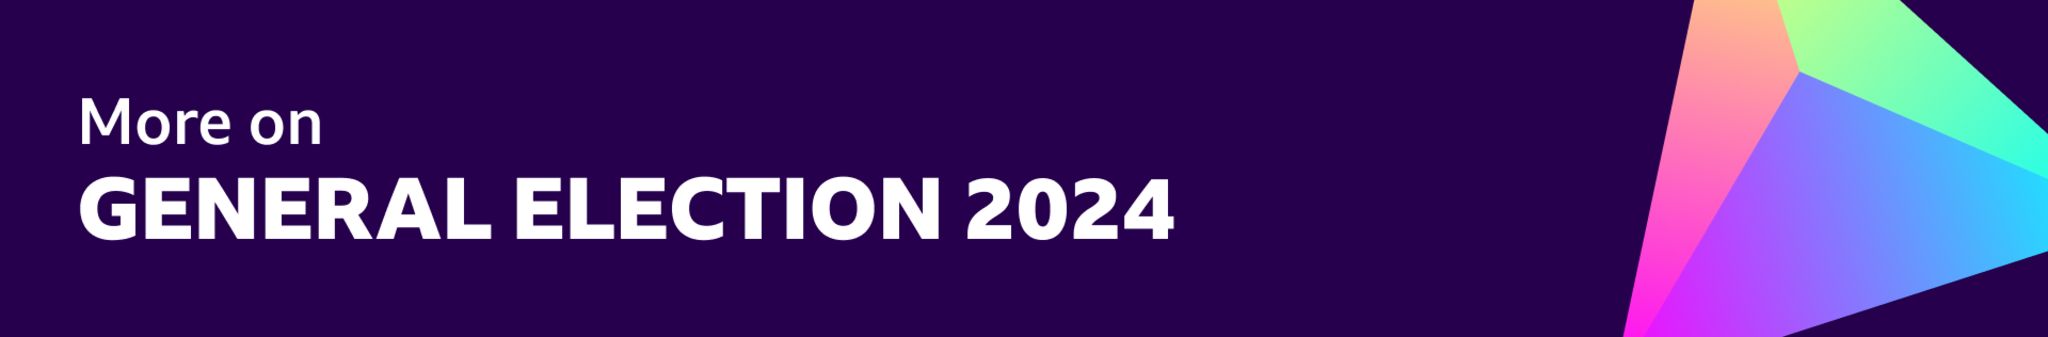 A banner which states: "More on the general election 2024"